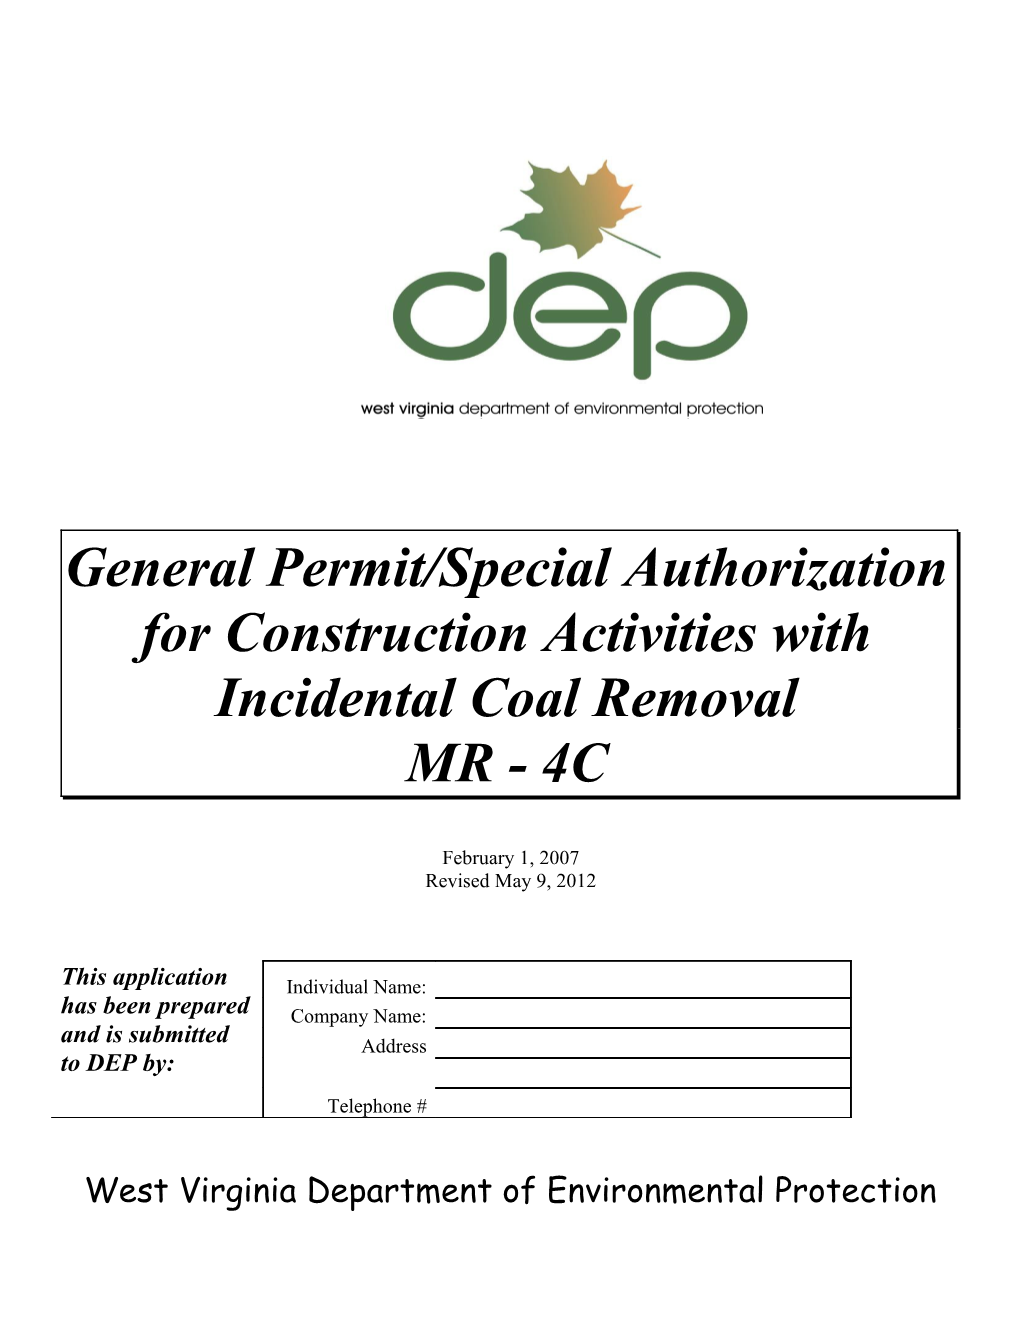 General Permit/Special Authorization for Construction Activities with Incidental Coal Removal